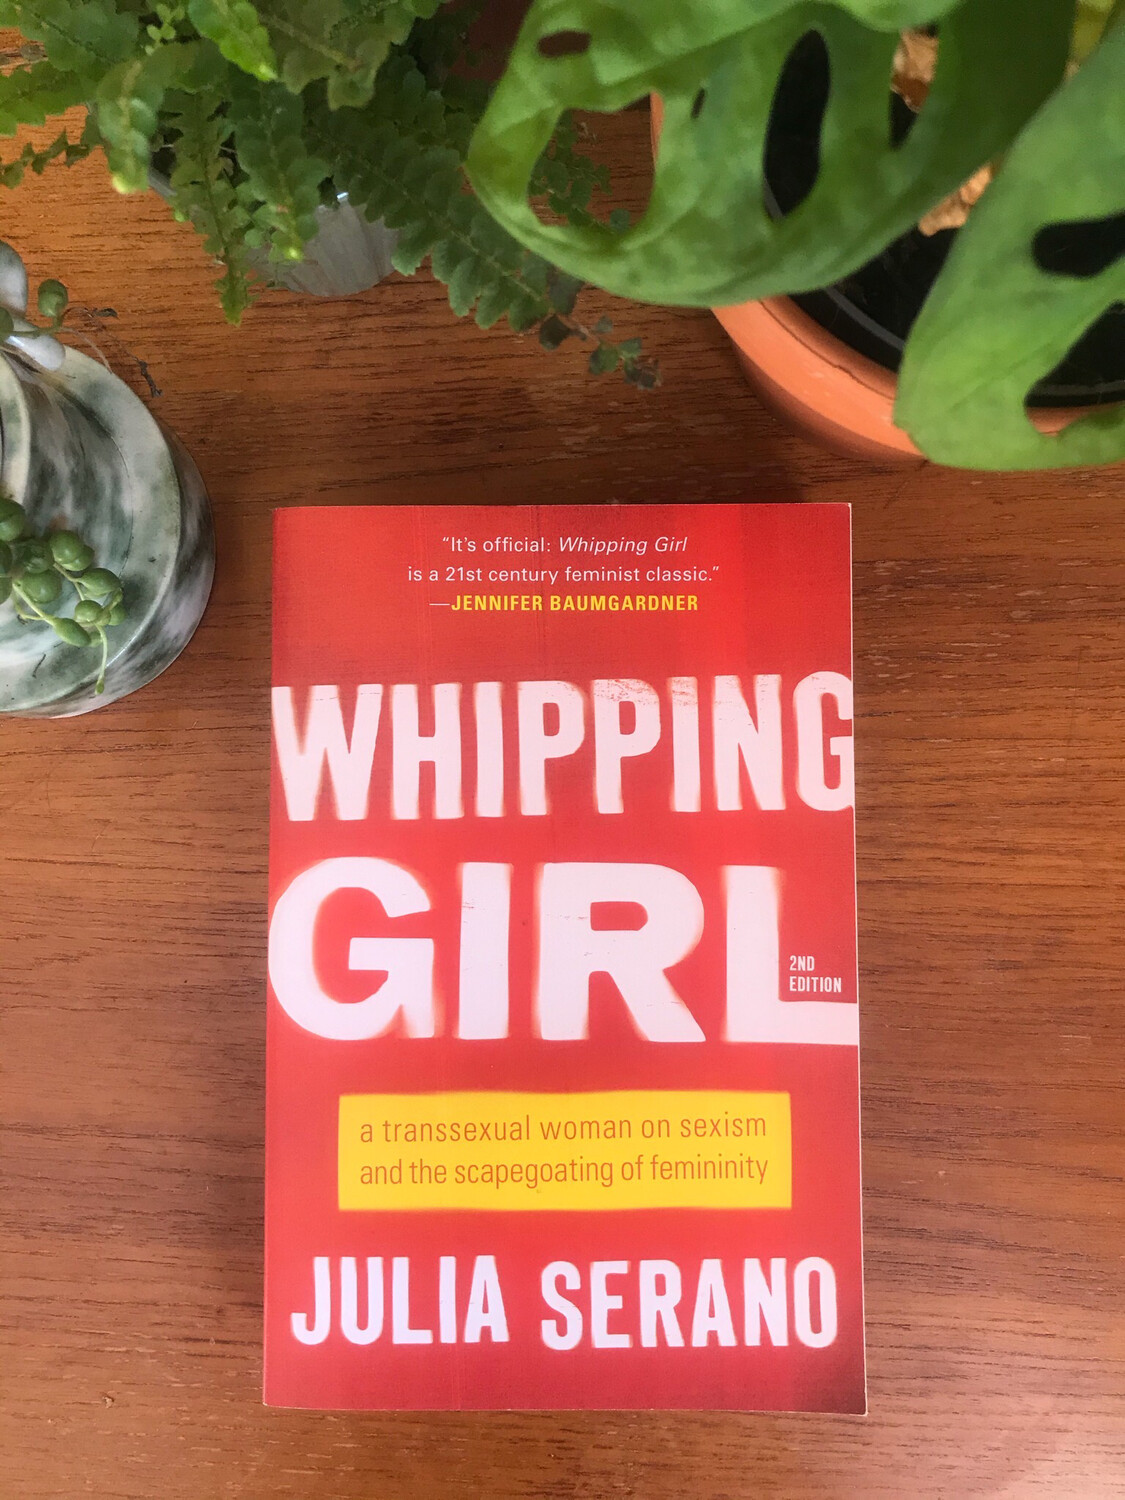 Whipping Girl: A Transsexual Woman On Sexism And The Scapegoating Of Femininity By Julia Serano